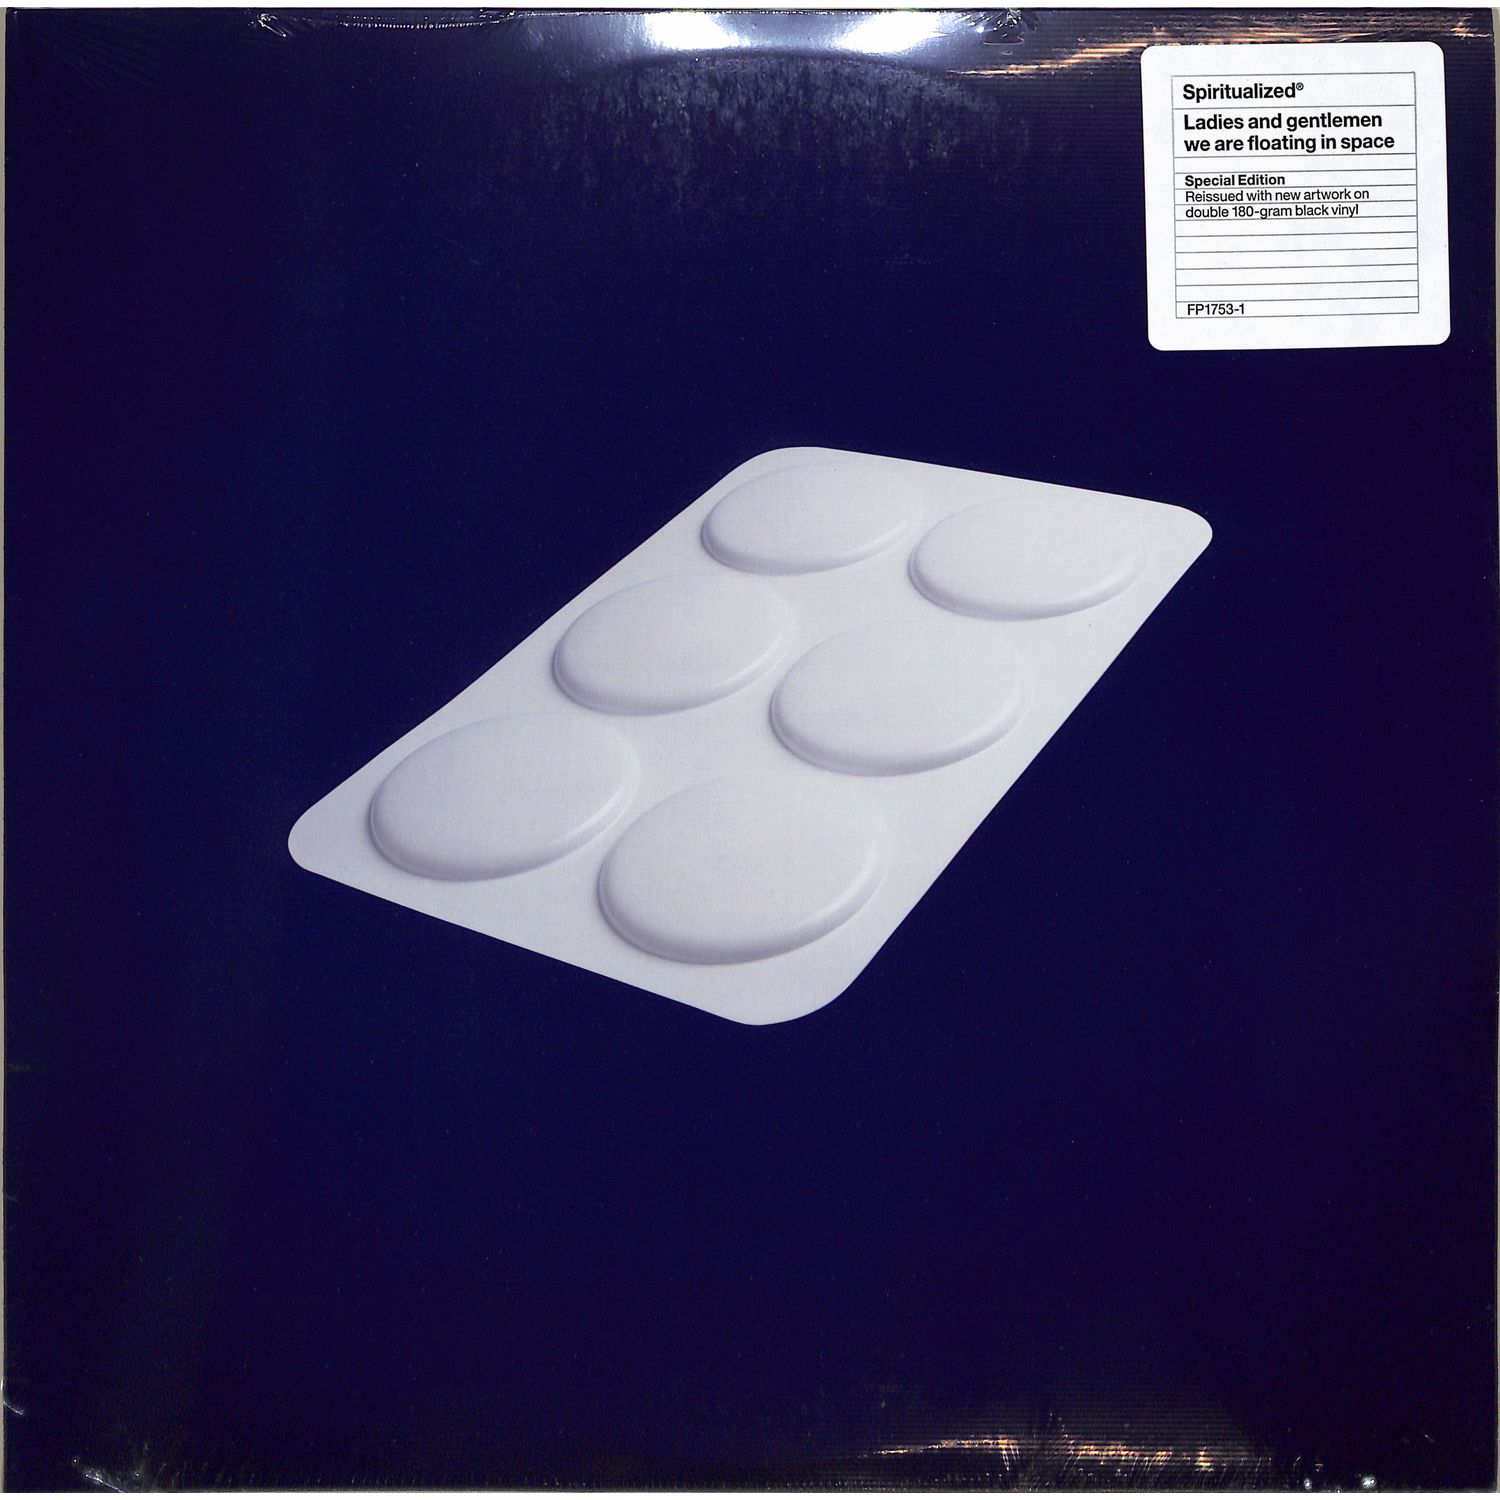 Spiritualized - LADIES AND GENTLEMEN WE ARE FLOATING IN SPACE 